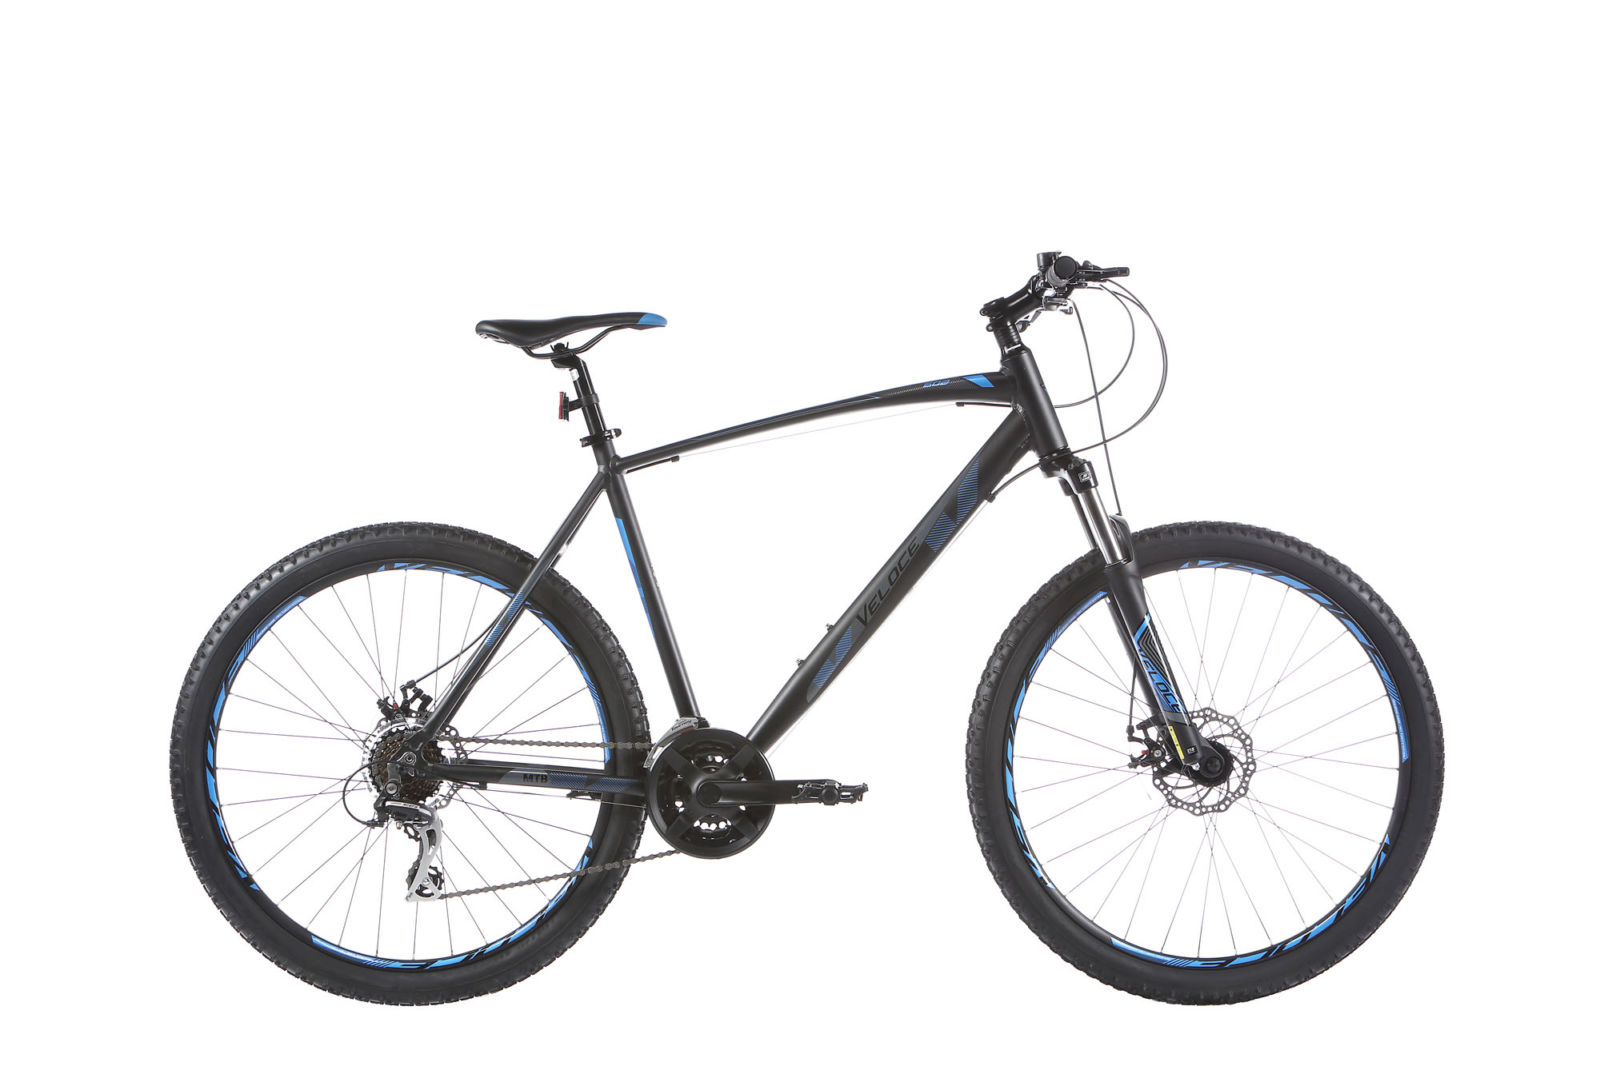 Outrage 602 Herenfiets 48 cm Antraciet blauw Acera  21 sp